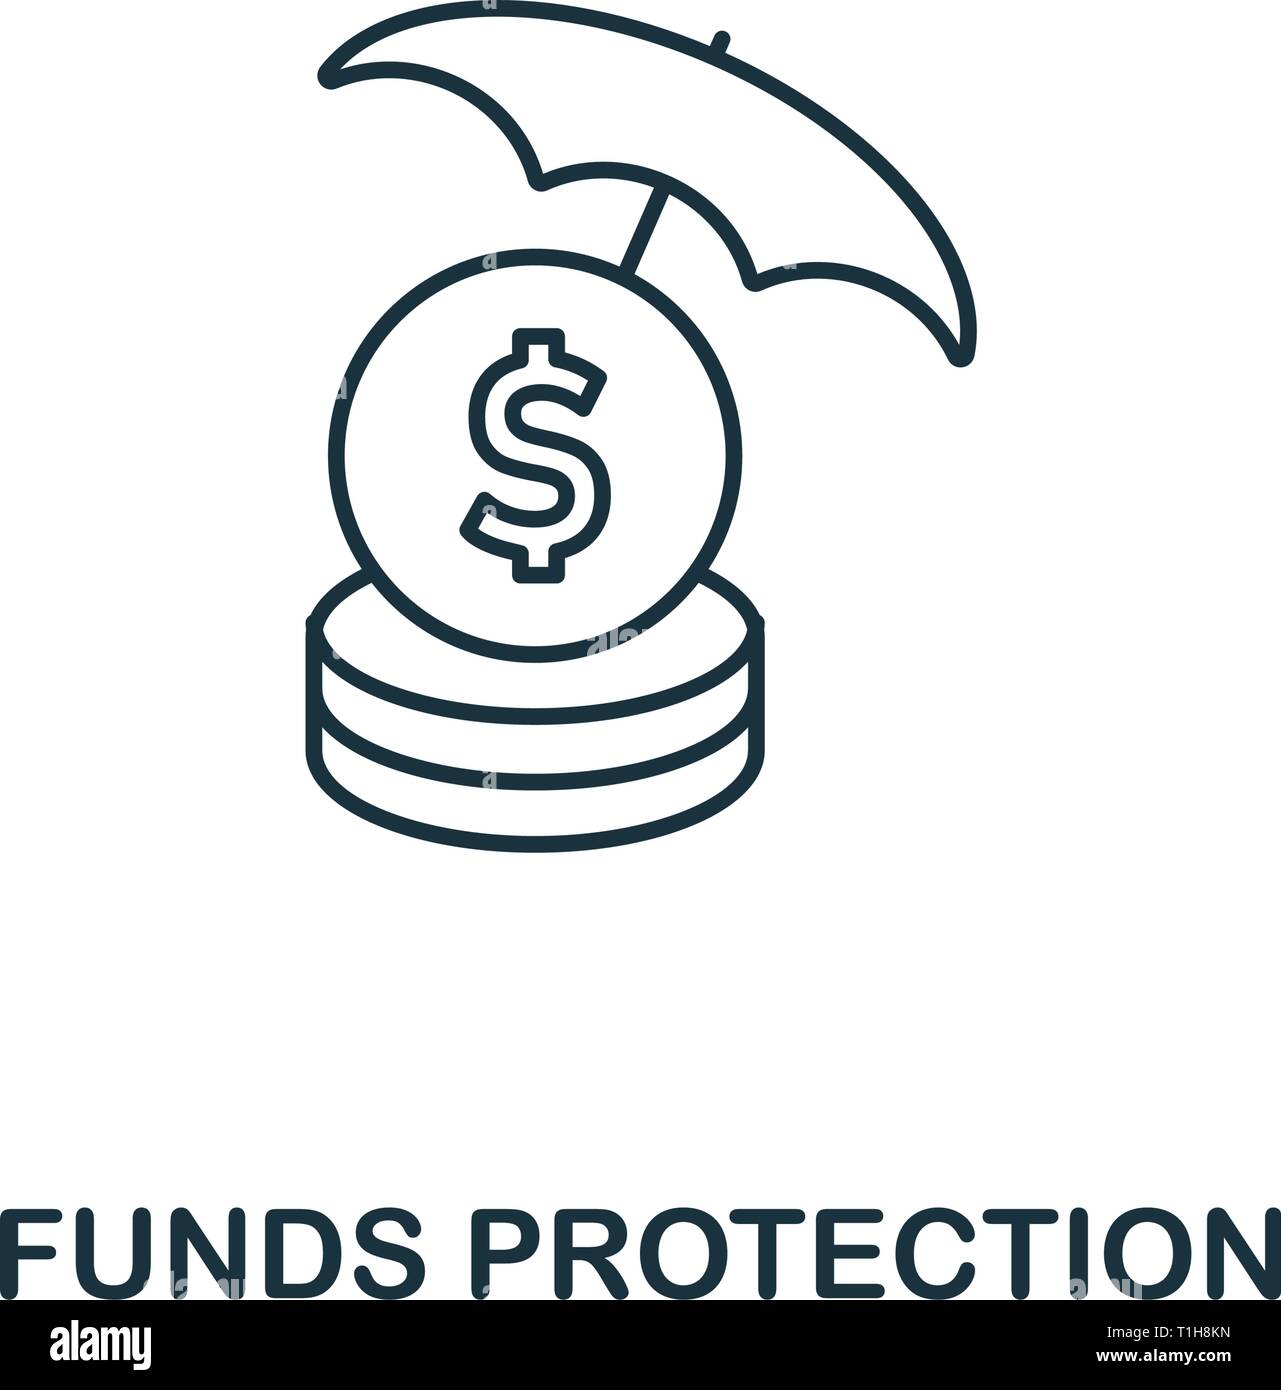 Funds Protection icon. Thin line design symbol from business ethics icons collection. Pixel perfect funds protection icon for web design, apps, softwa Stock Vector